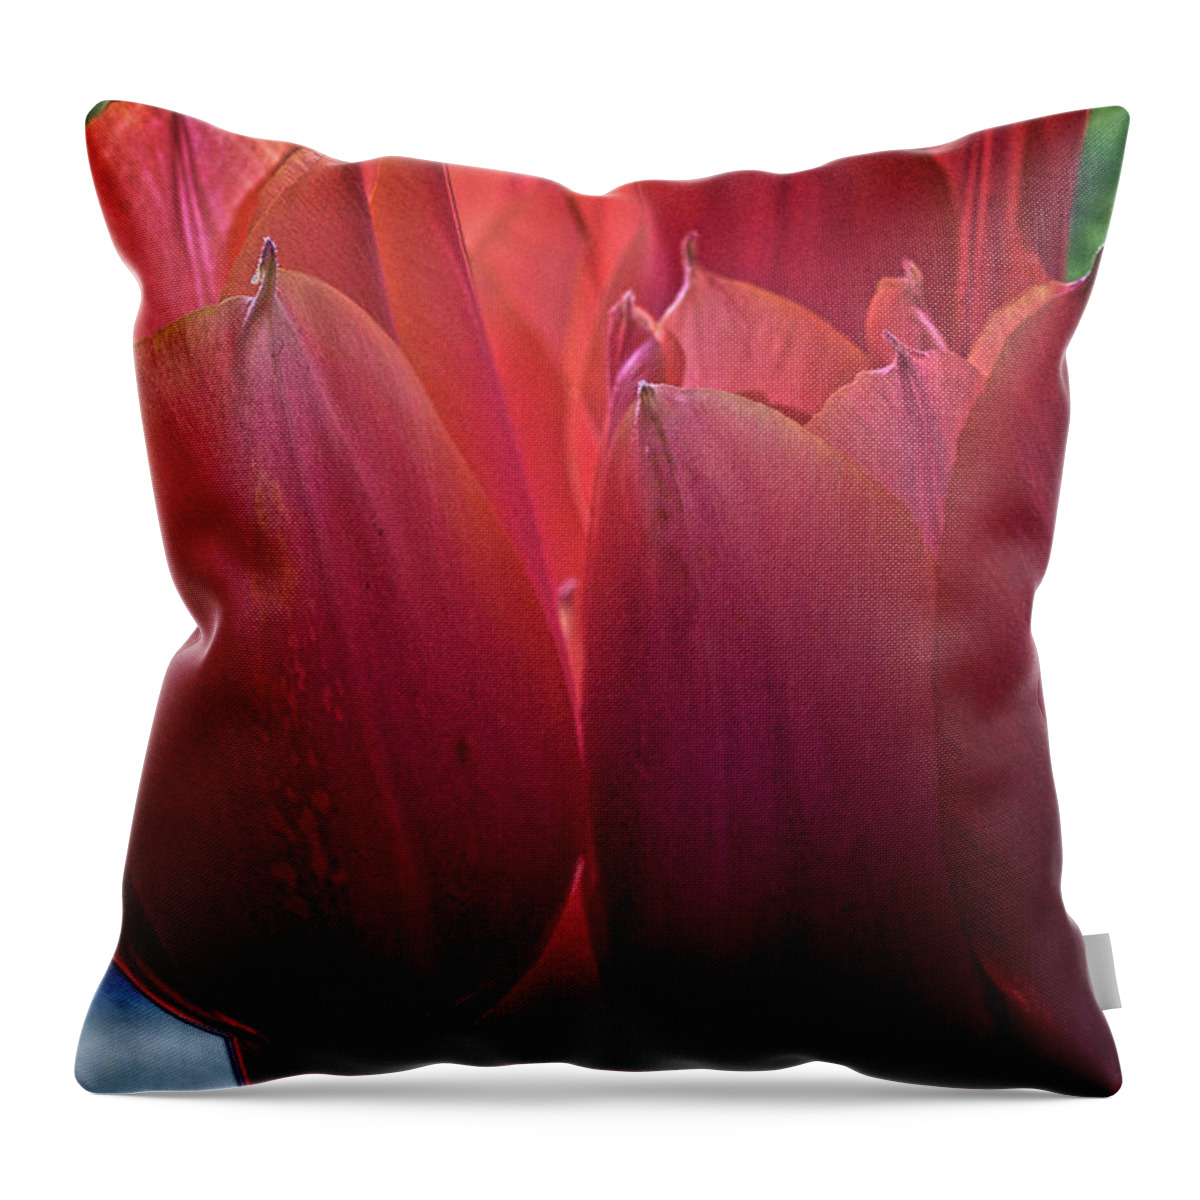  Flowers Throw Pillow featuring the digital art Tulips by Charles Muhle